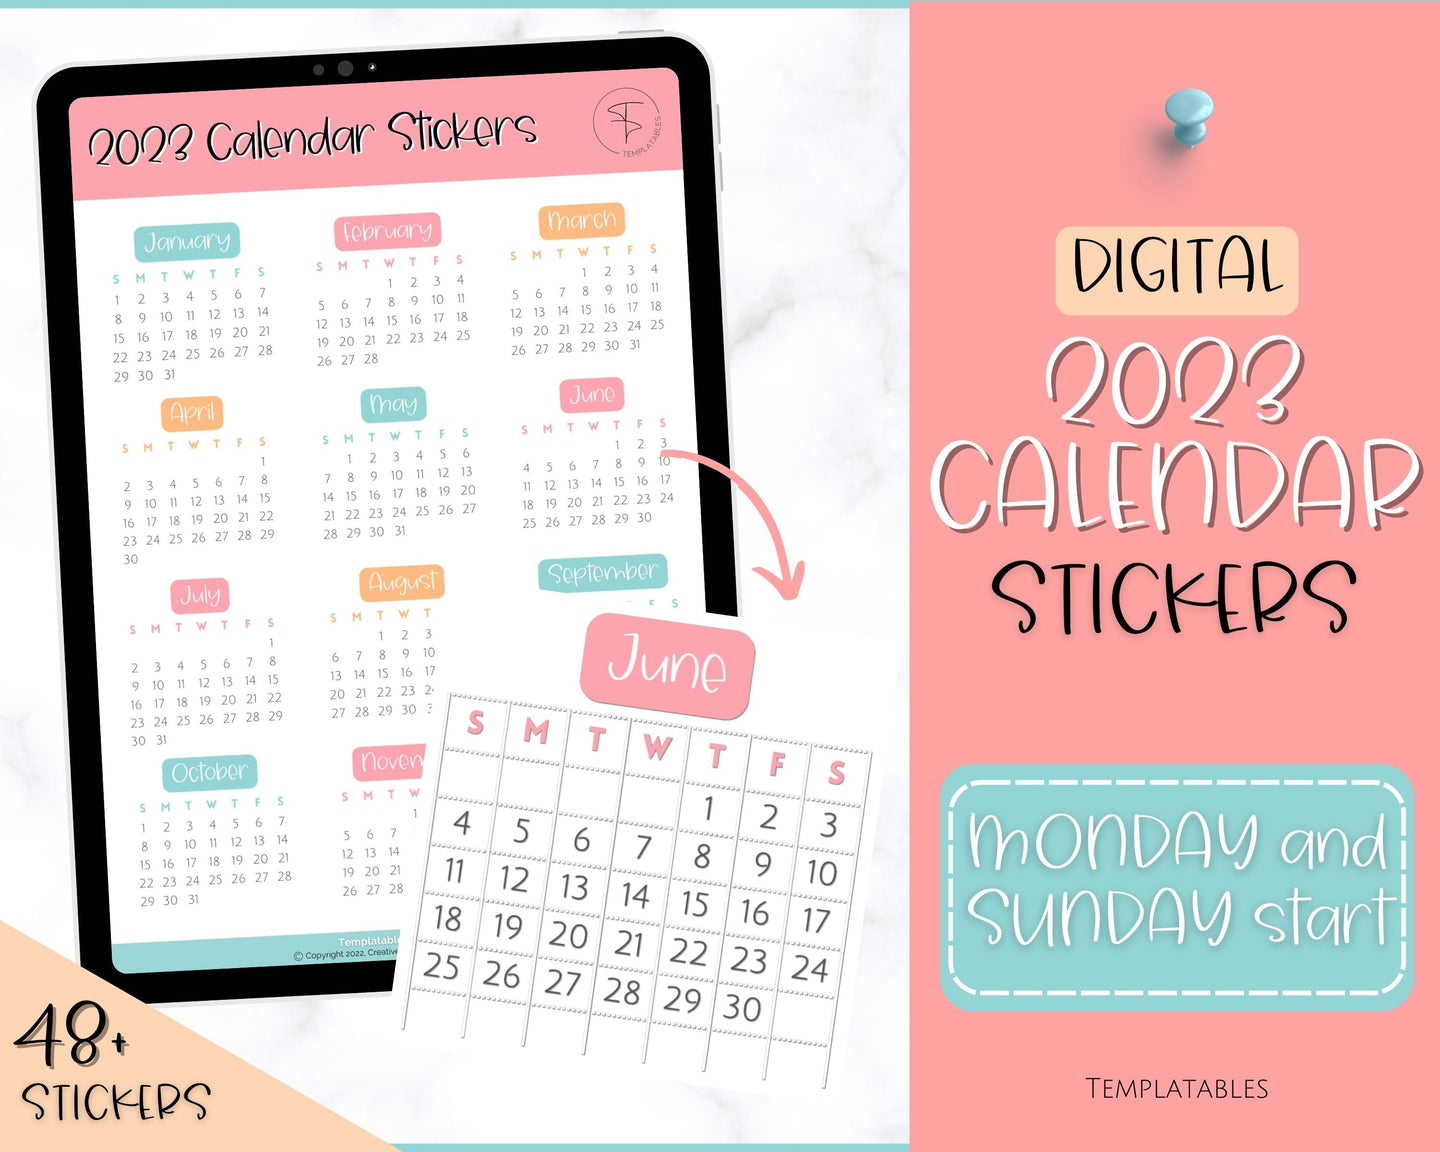 2023 Digital Calendar Stickers for iPad | GoodNotes & Notability Sticky Notes, Mini Calendar Digital Planner Stickers, Transparent PNGs | Colorful Sky